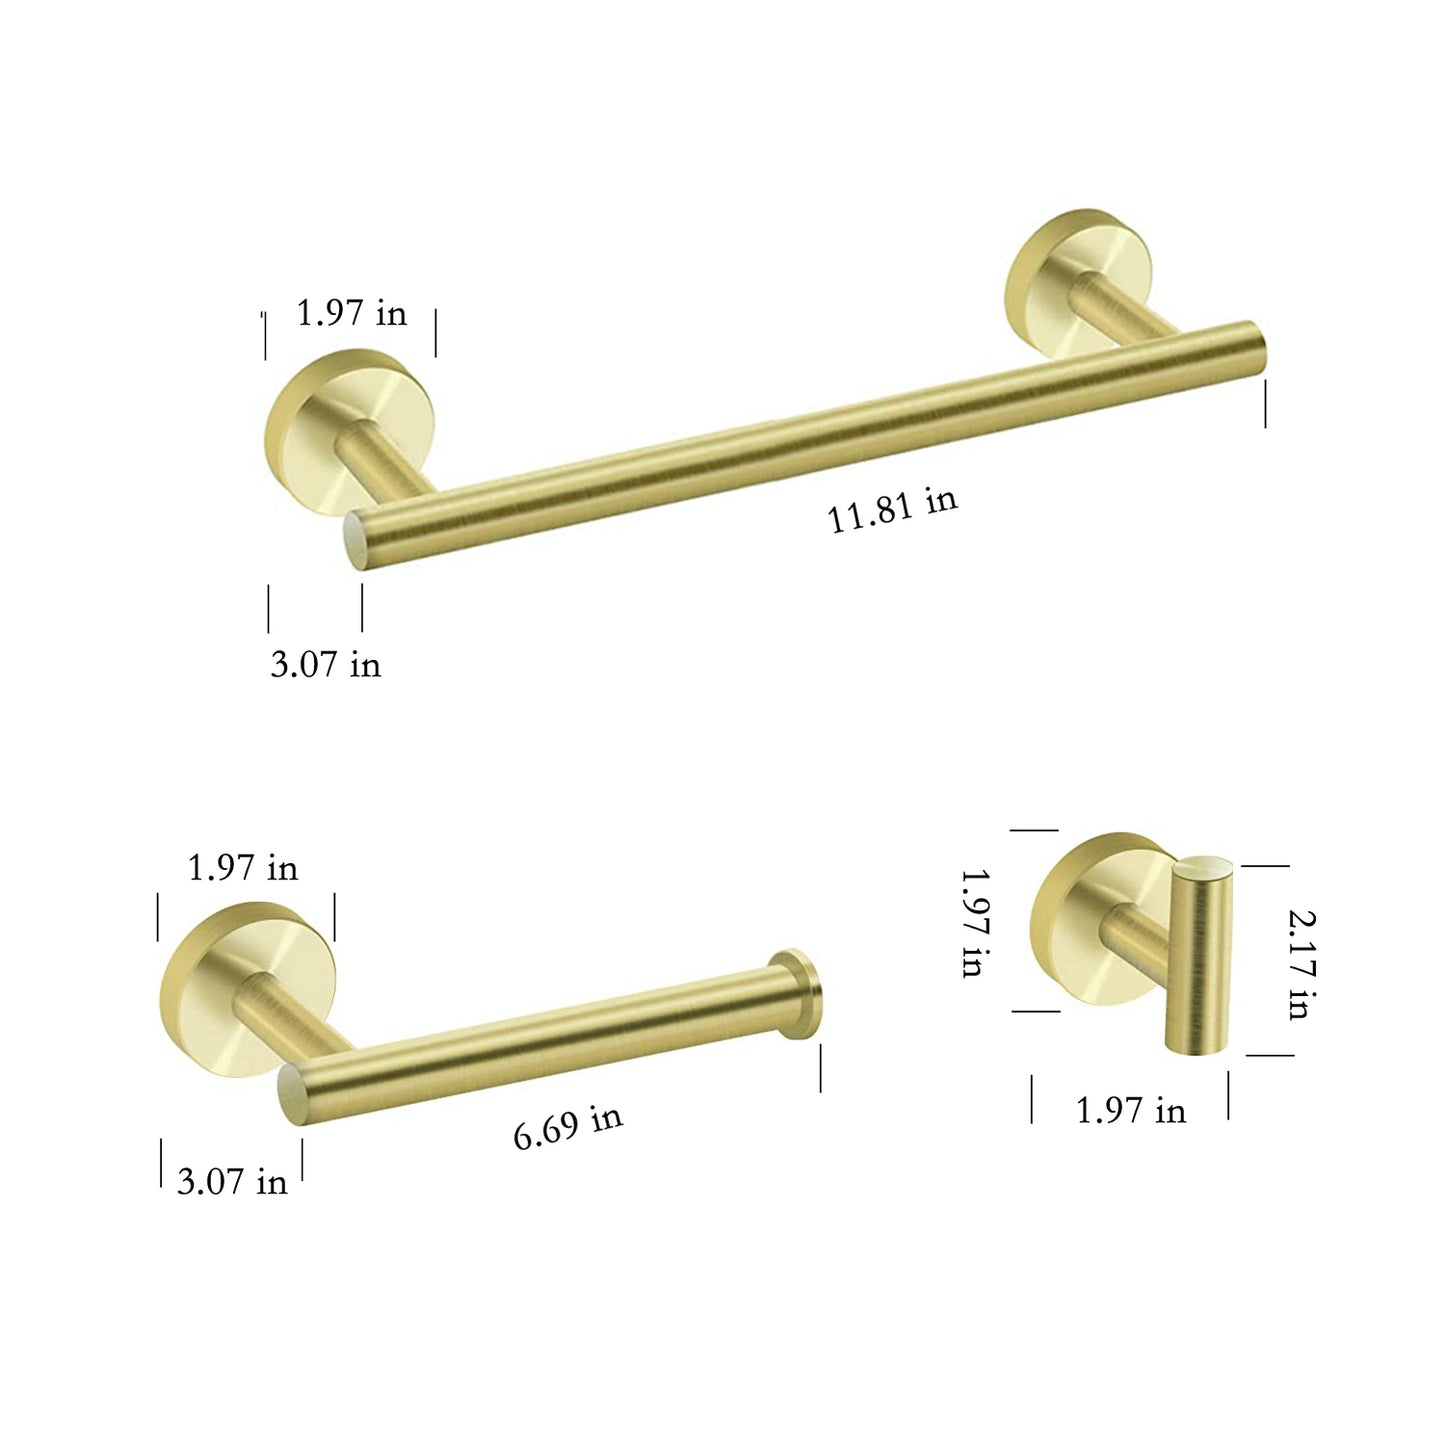 3-Piece Bath Hardware Set with Towel Bar, Toilet Paper Holder and Towel Hook in Gold